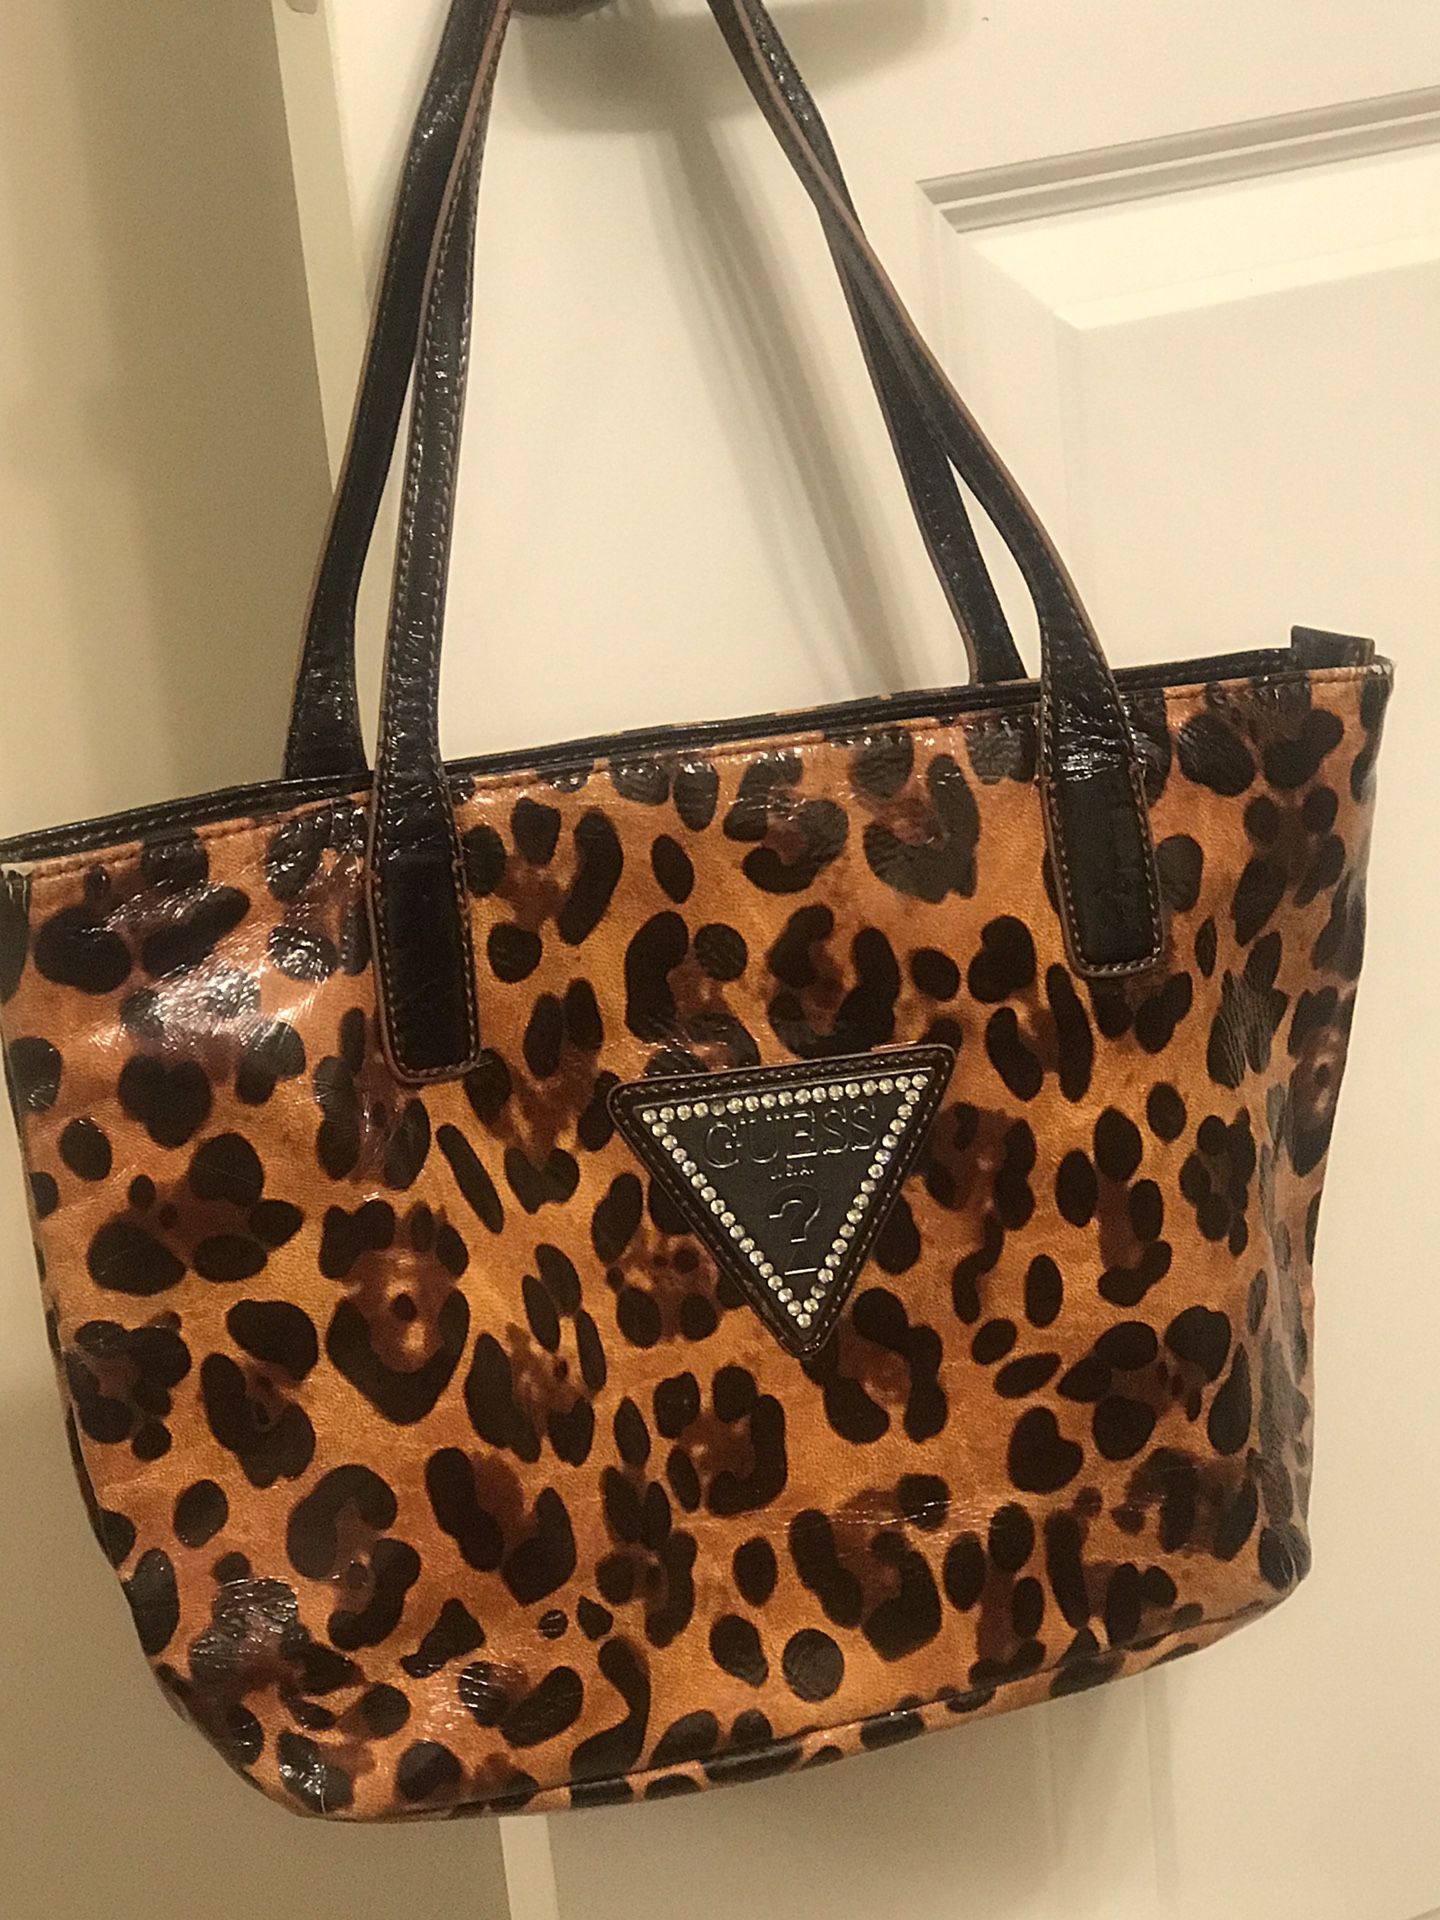 Authentic guess purse